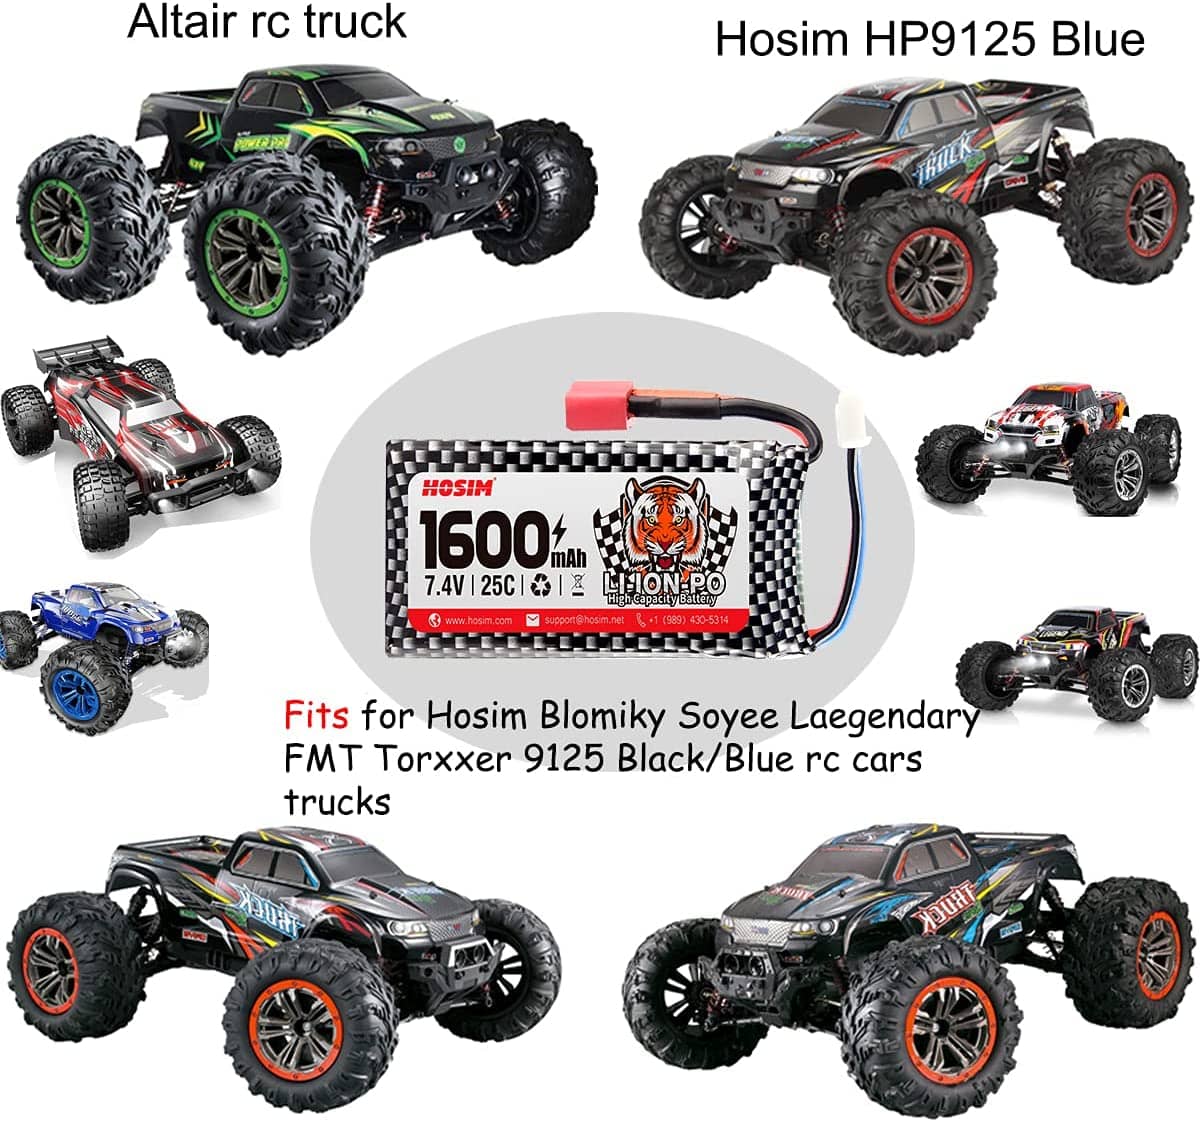 Hosim 3PCS 9125 1600mah lipo Battery 7.4v 25C RC Cars Battery with 1 Battery Bag, 1 Balance Charger, 1 Strap & 1 Double Connector for 9125 9126 HS9125 RC Truck